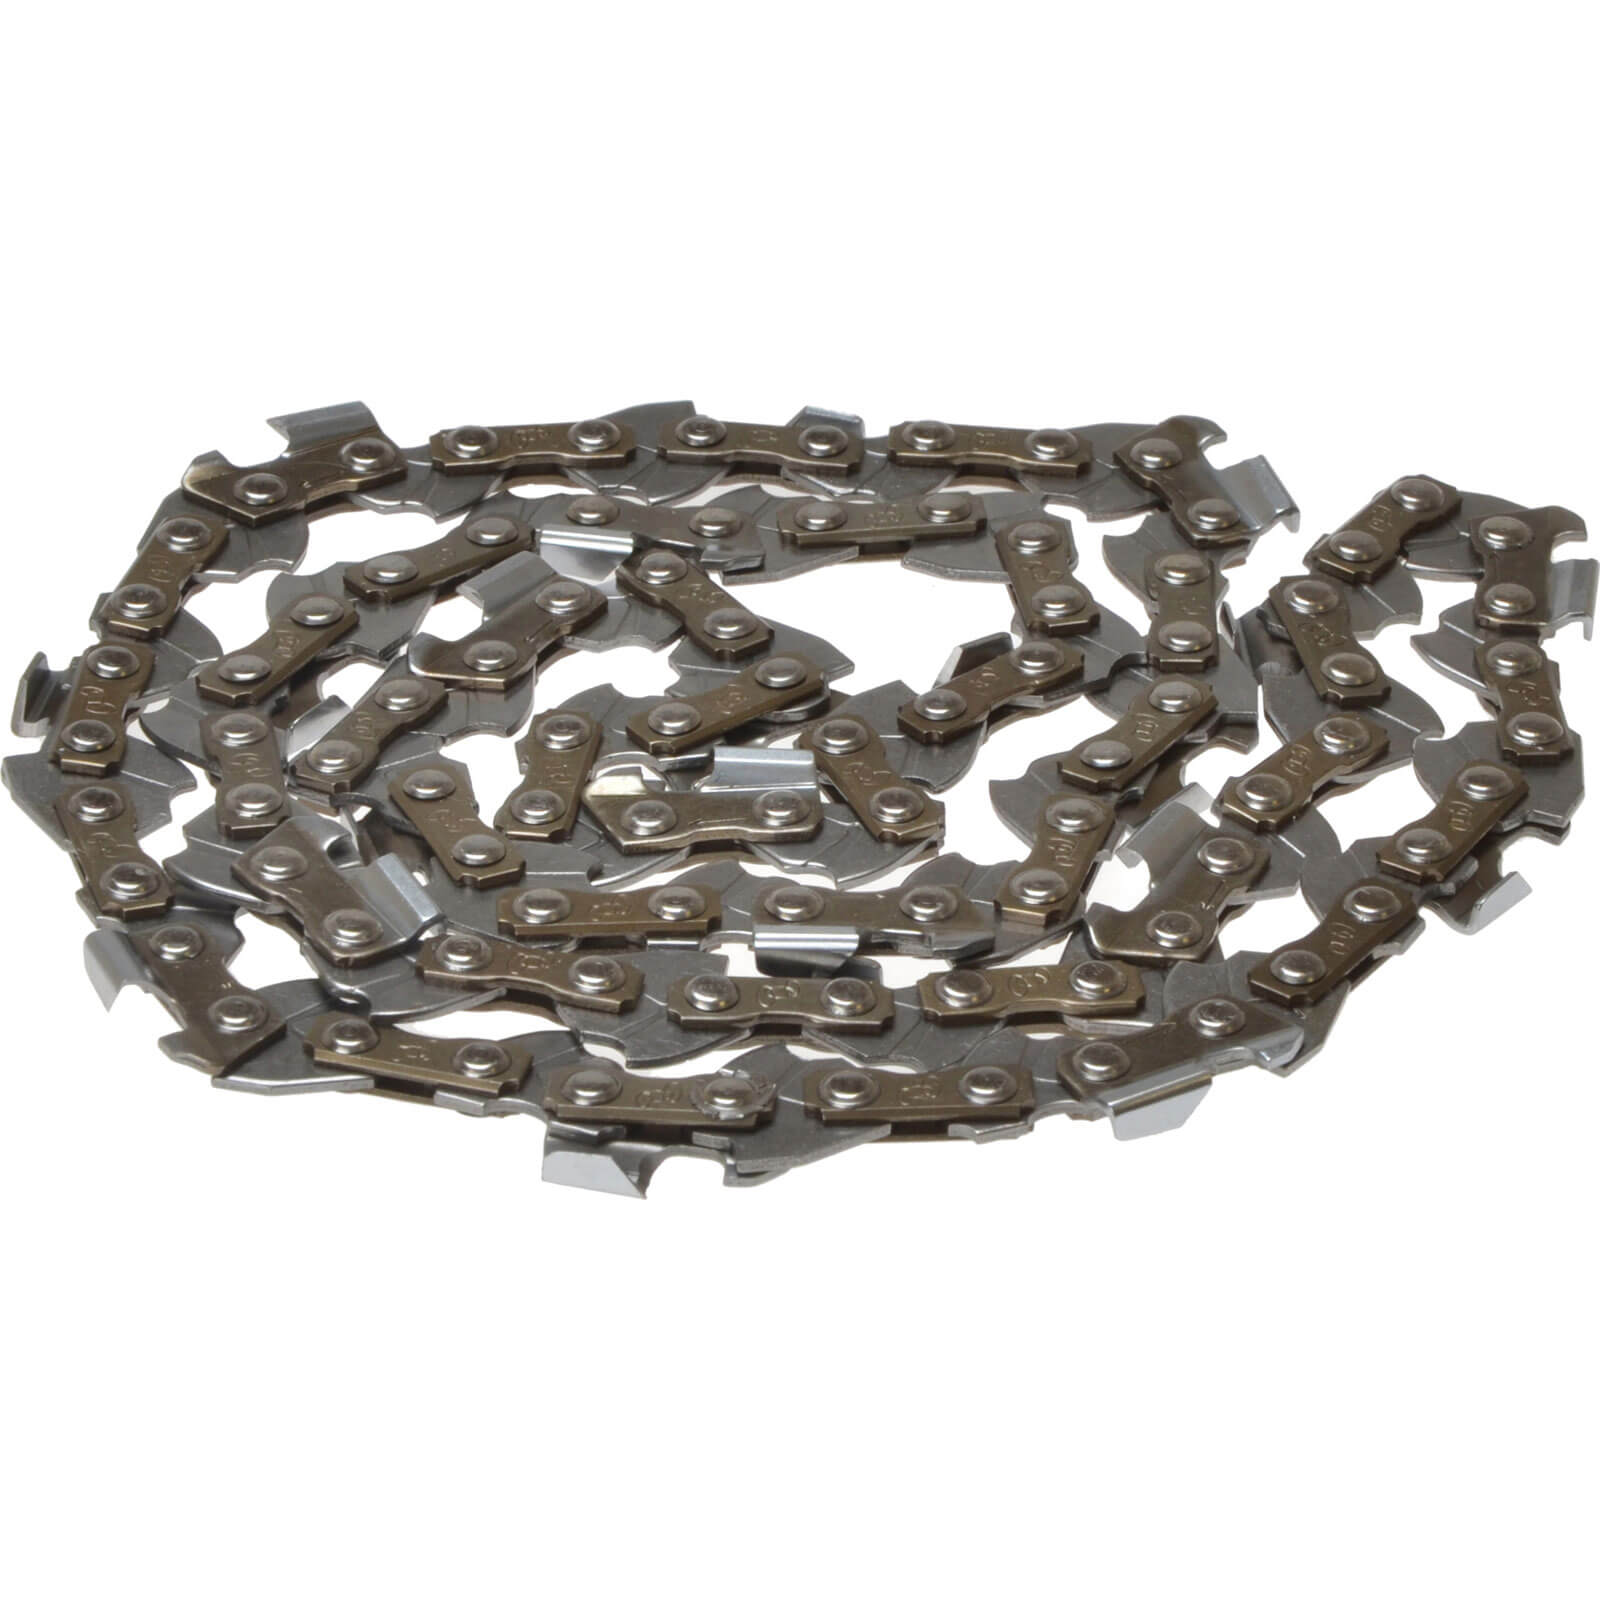 Image of ALM Replacement Chain 3/8" x 45 Links Fits Bosch 30cm Chainsaws 300mm